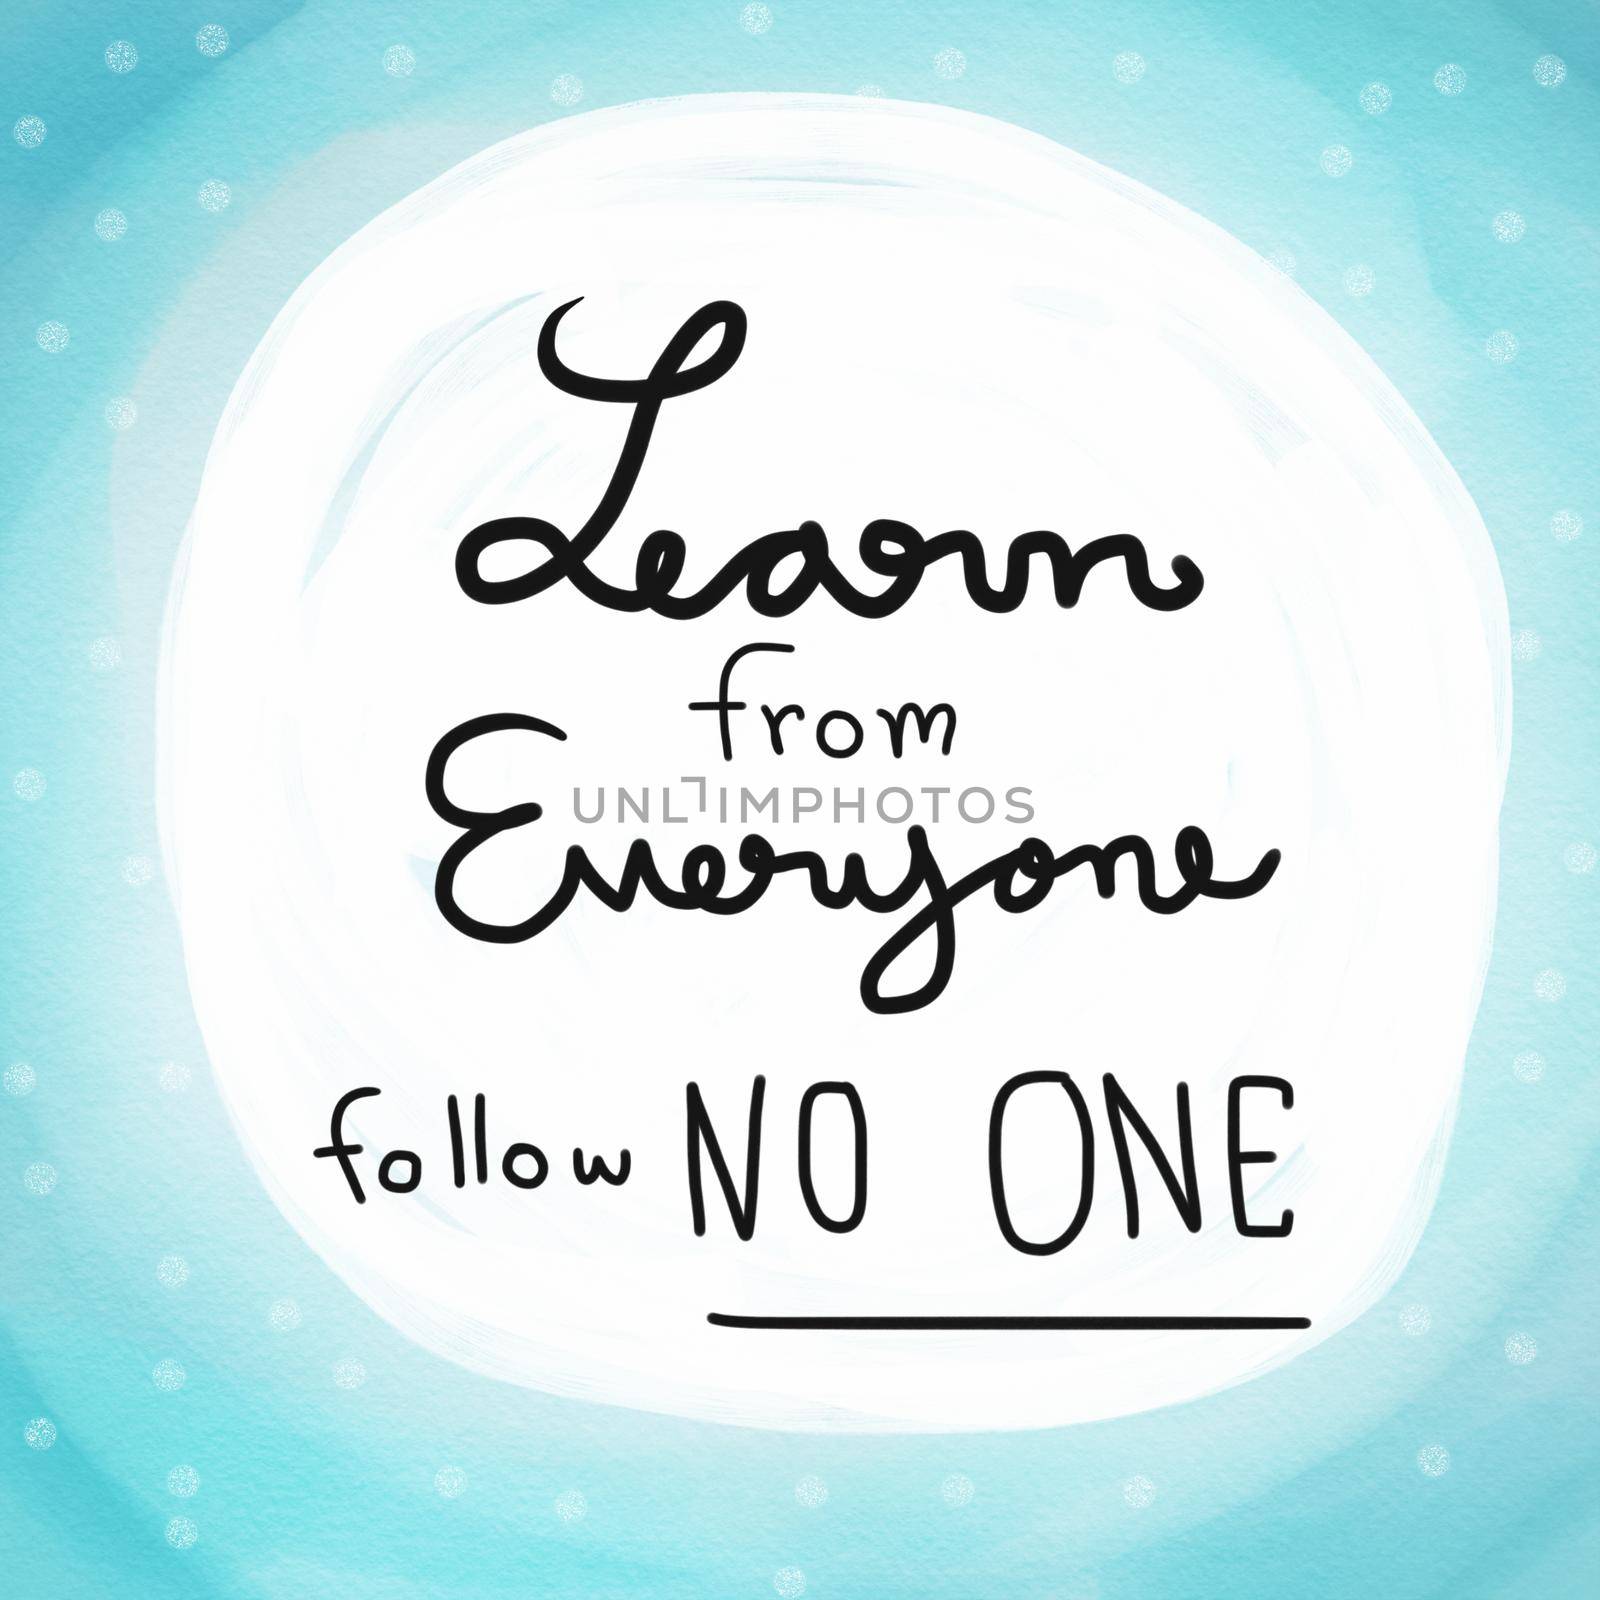 Learn from everyone follow no one word lettering on blue watercolor background illustration